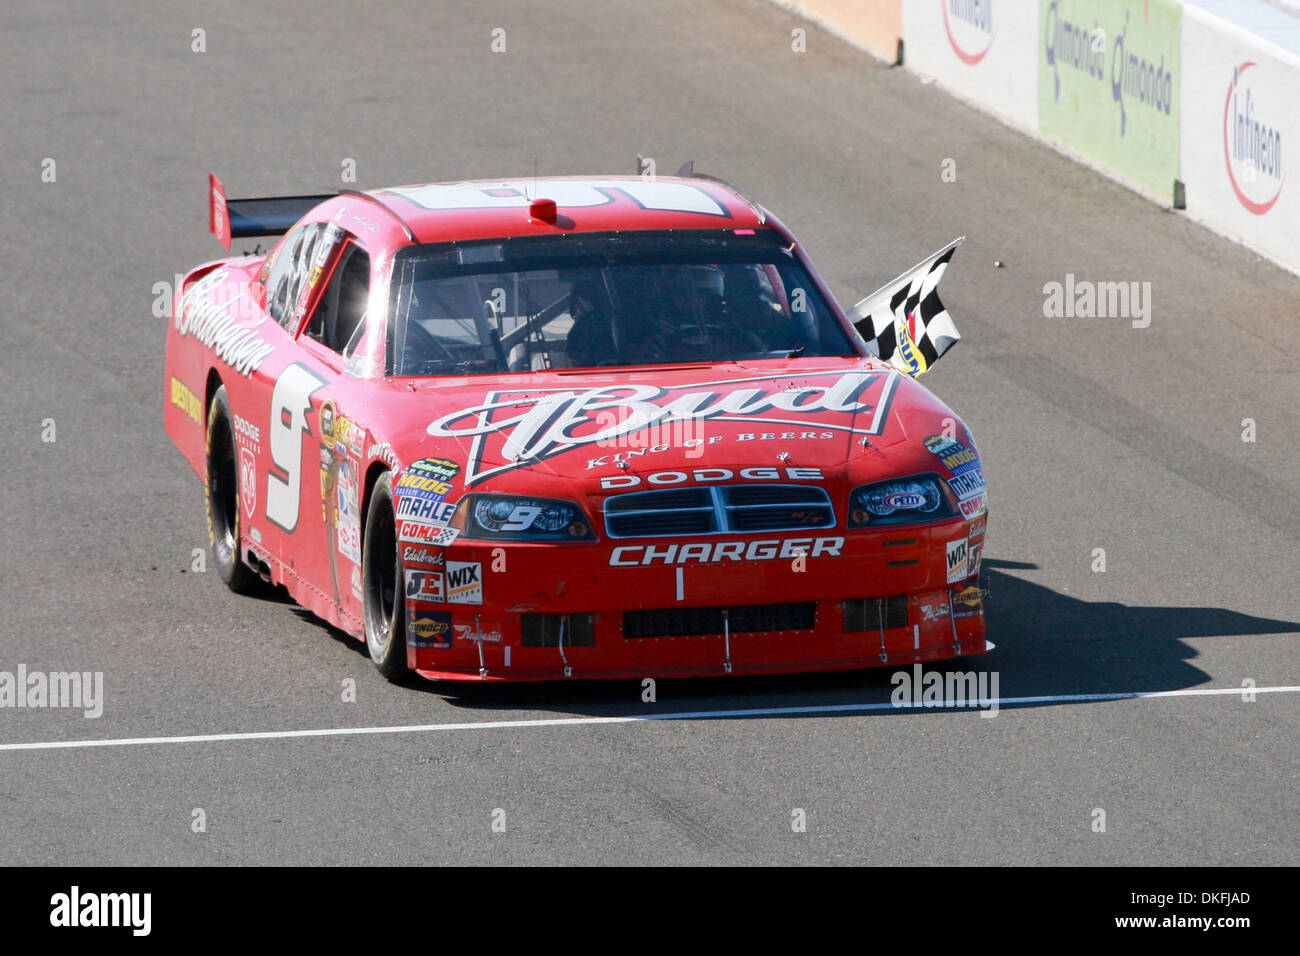 21 June 2009 Kasey Kahne In The 9 Budwiser Car During The Stock Photo Alamy